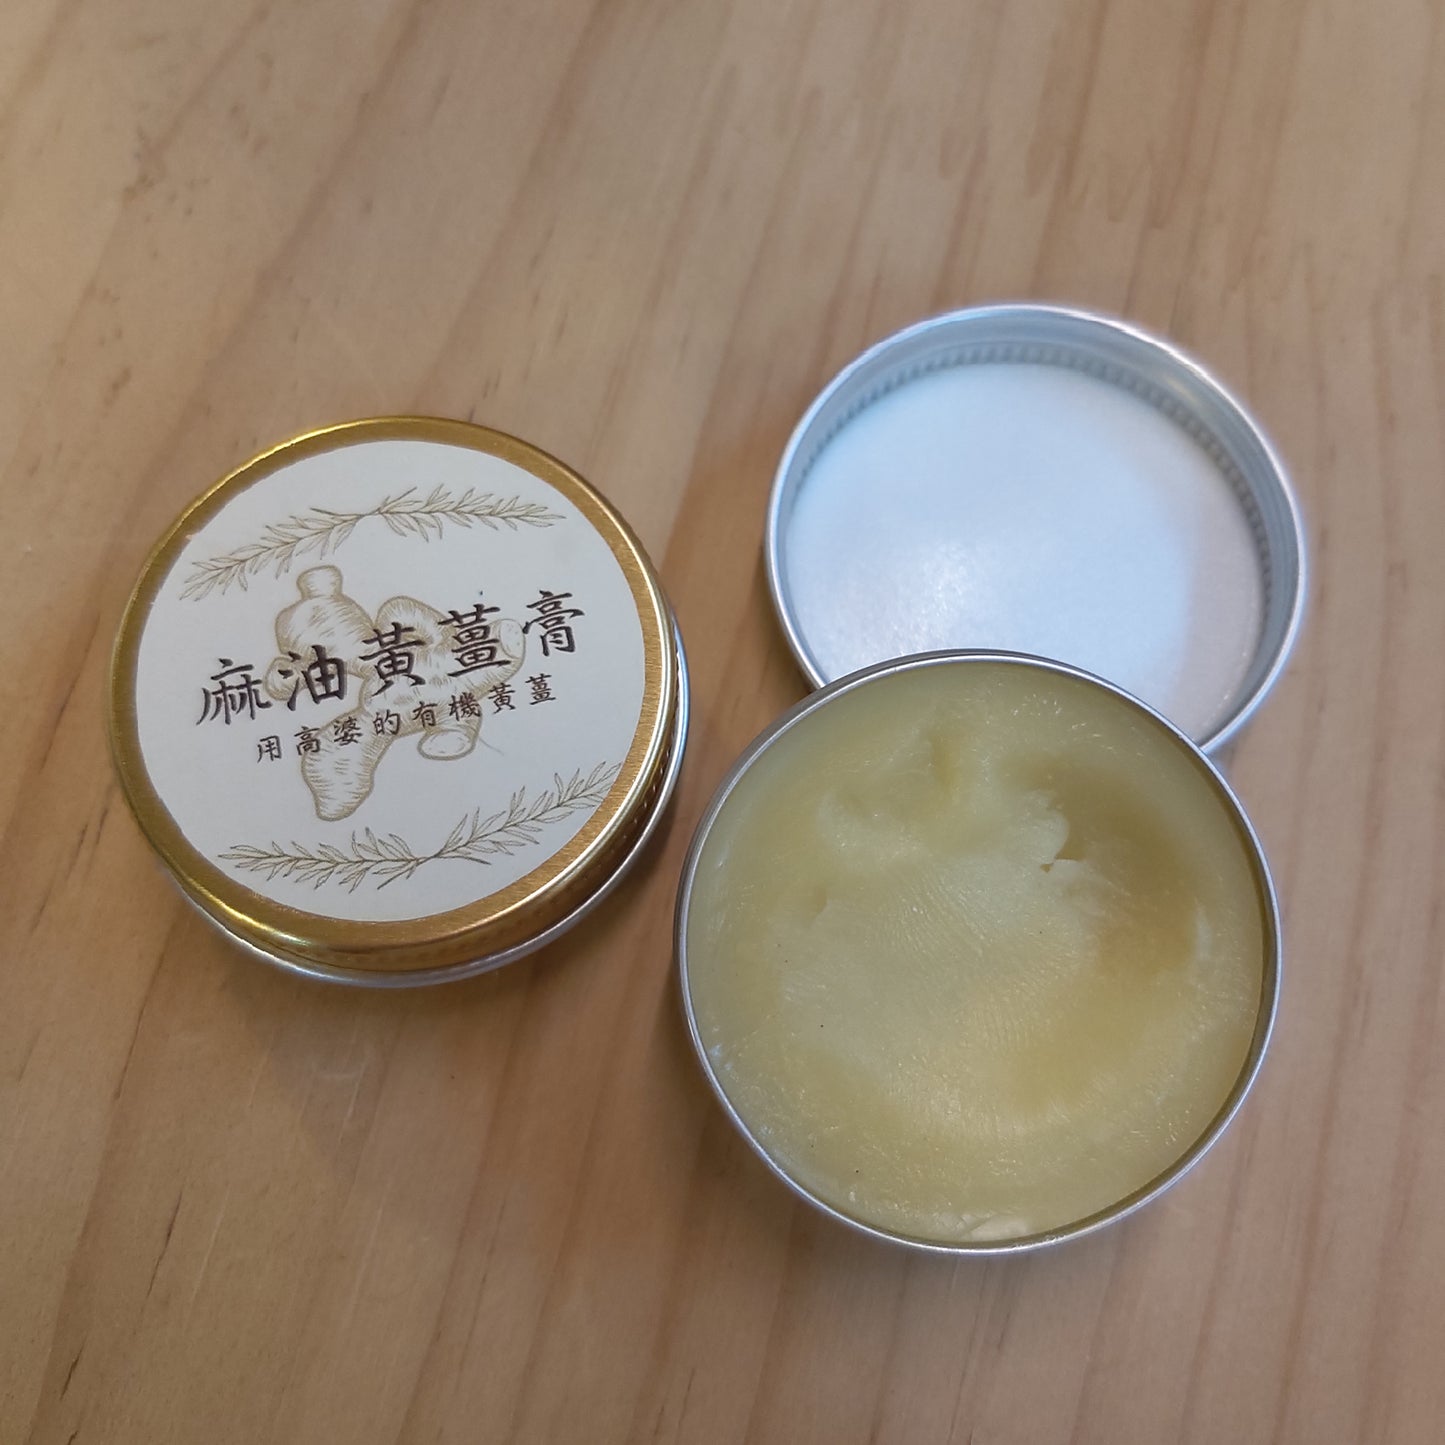 MADE SOAP MAN 麻油黃薑膏 Turmeric Ointment